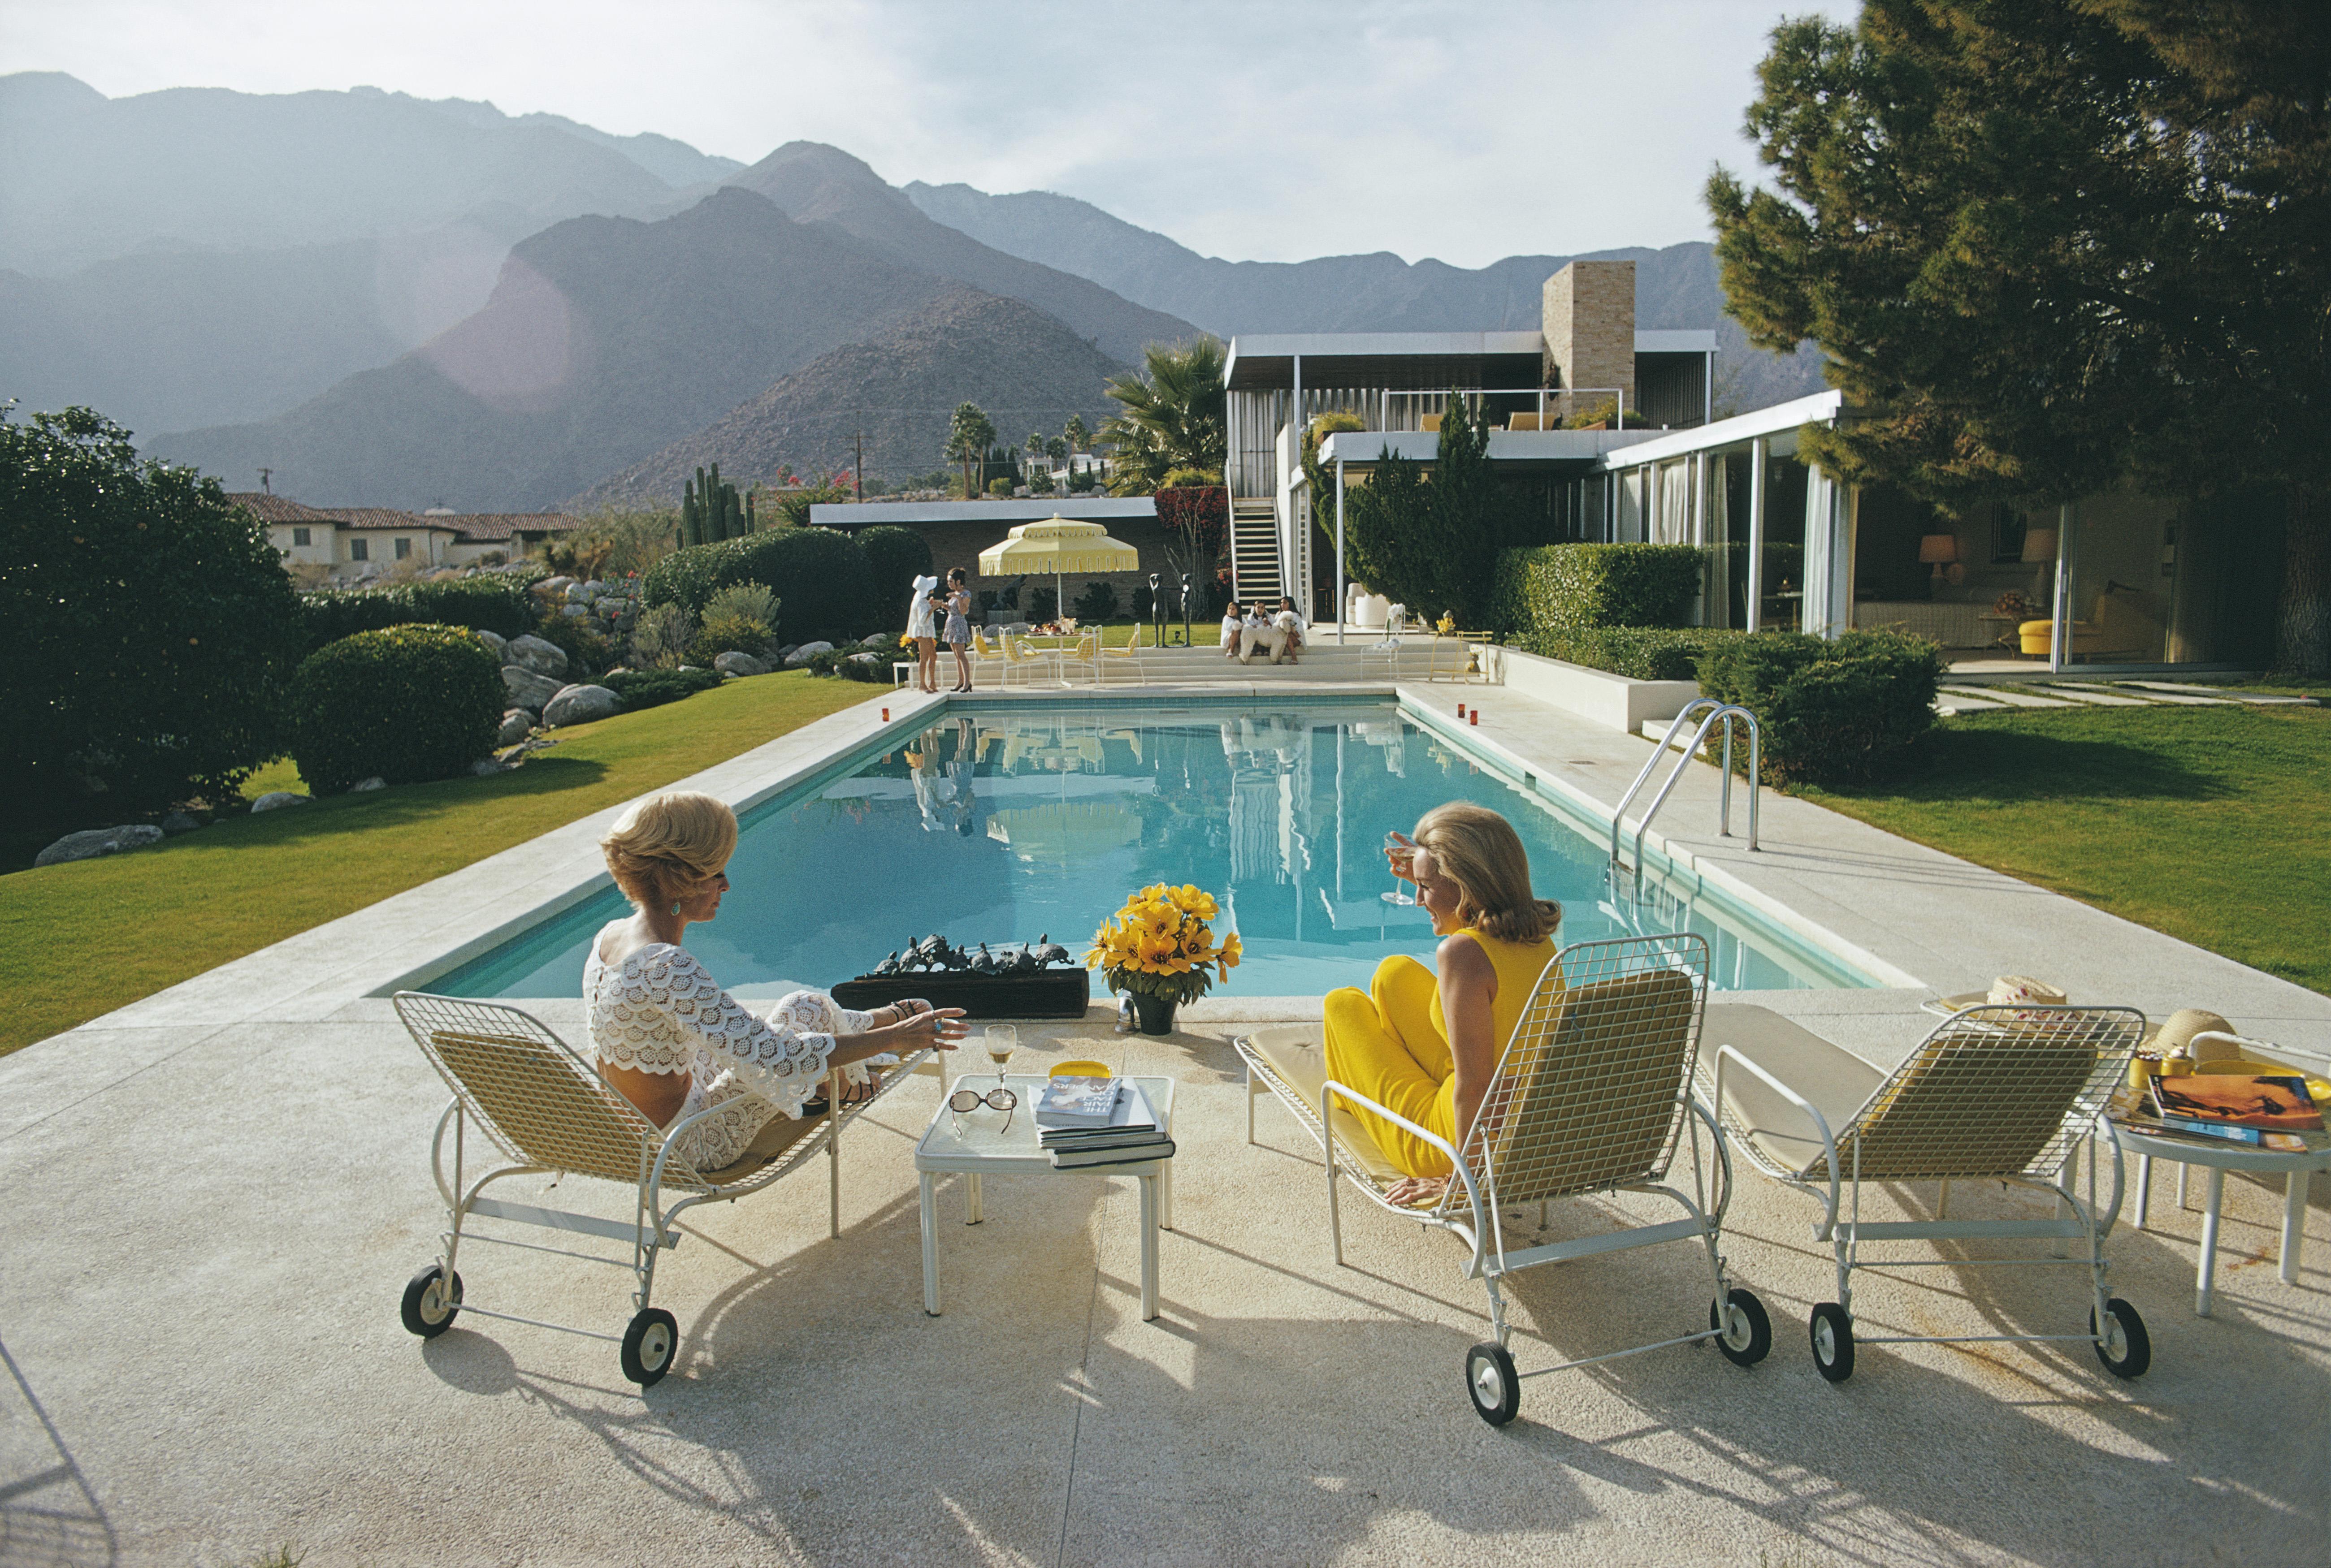 Slim Aarons
Poolside Pairs
1970 (printed later)
C Print 
Estate signature stamped and numbered edition of 150

January 1970: The Kaufmann Desert House in Palm Springs, California, designed by Richard Neutra in 1946 for businessman Edgar J. Kaufmann,